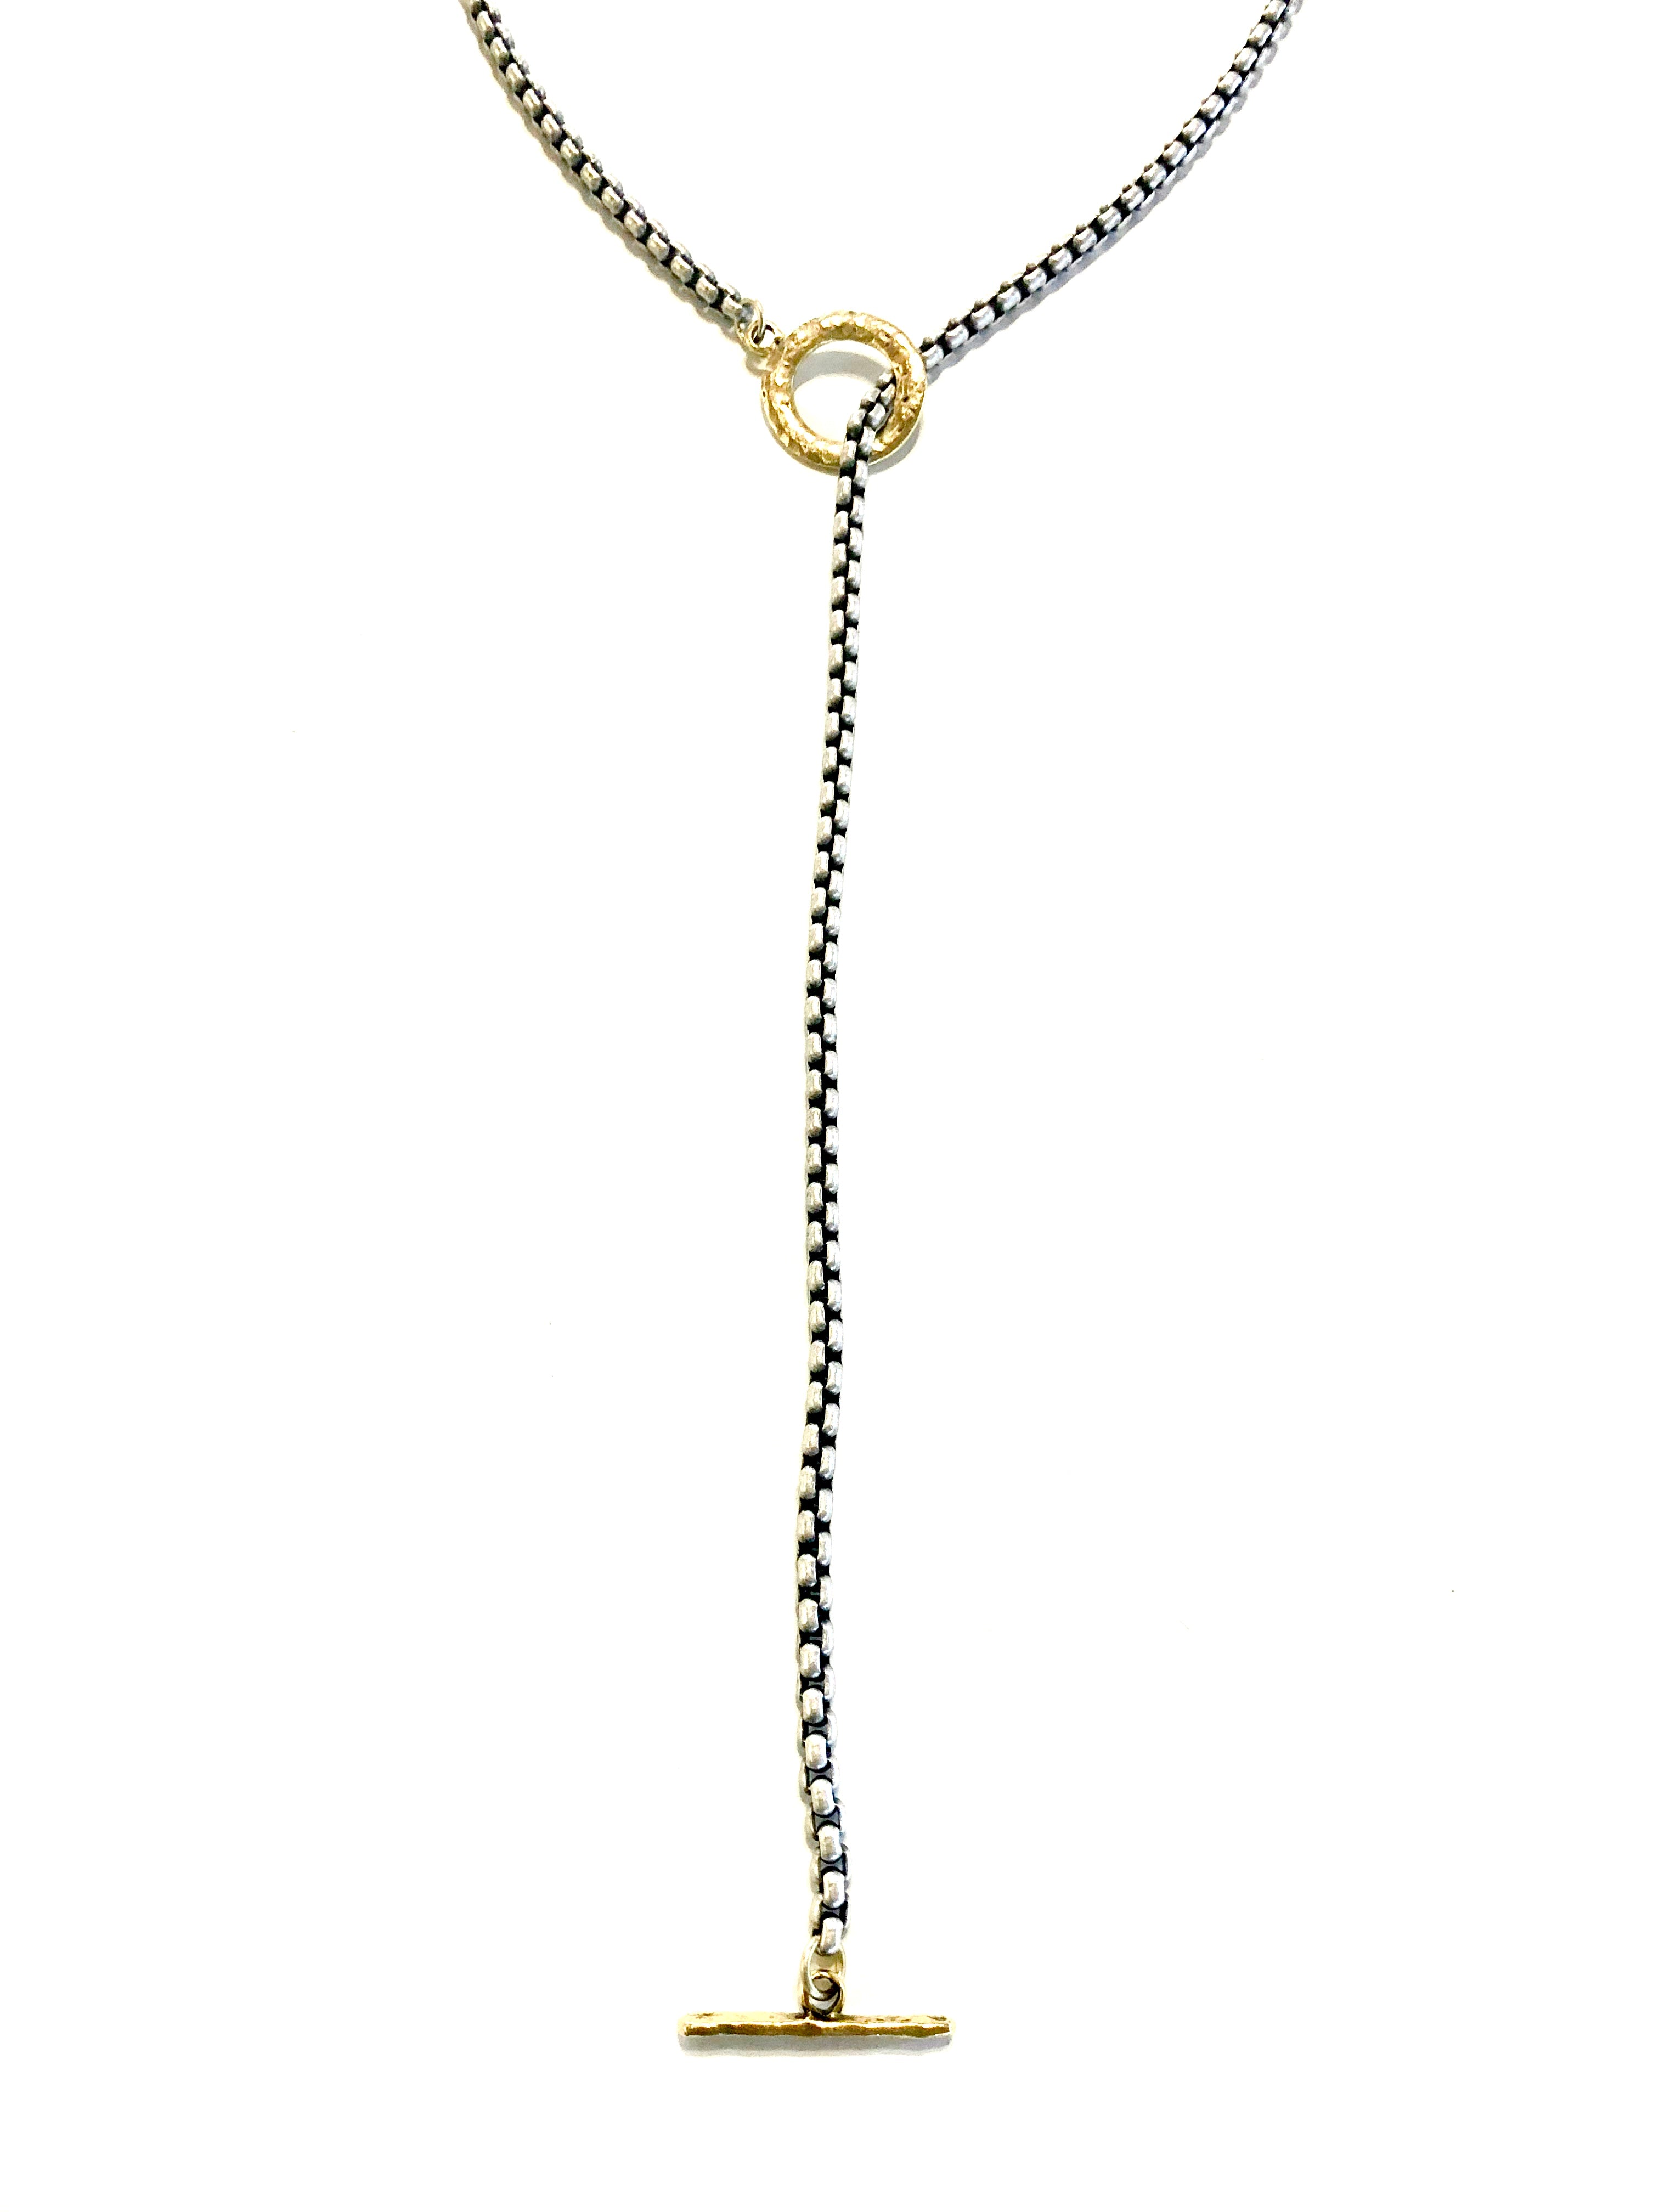 Lauren – long wrap necklace with toggle